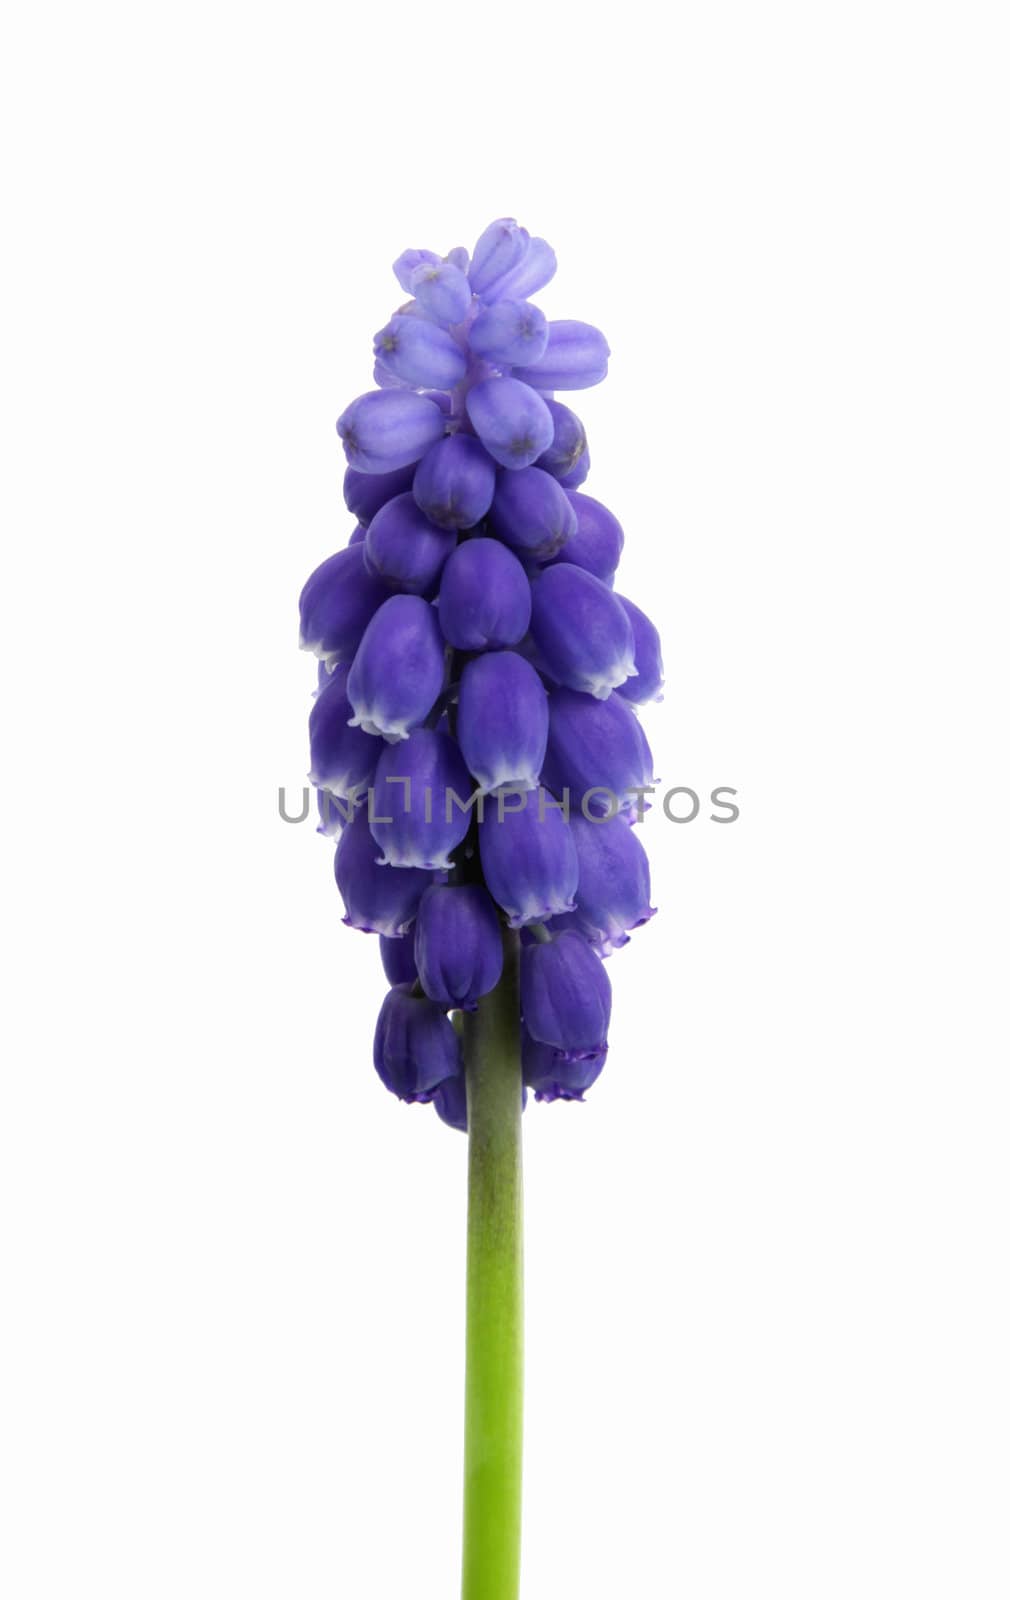 An isolated Grape Hyacinth (Muscari) flower, shot against white.